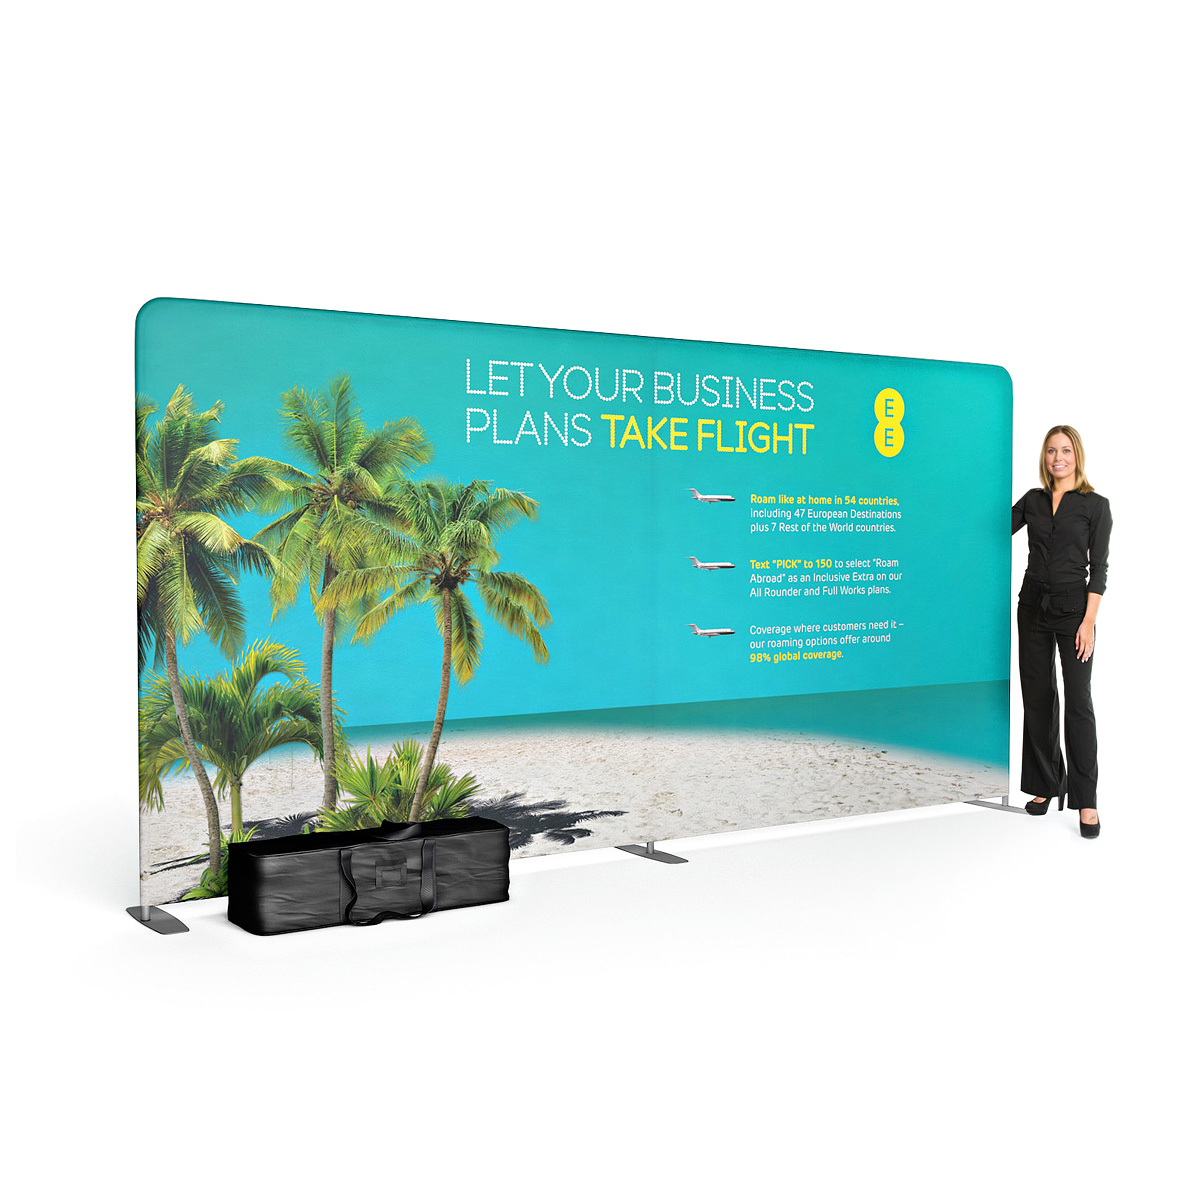 FABRIWALL Fabric Display Exhibition Stand 4m x 2m